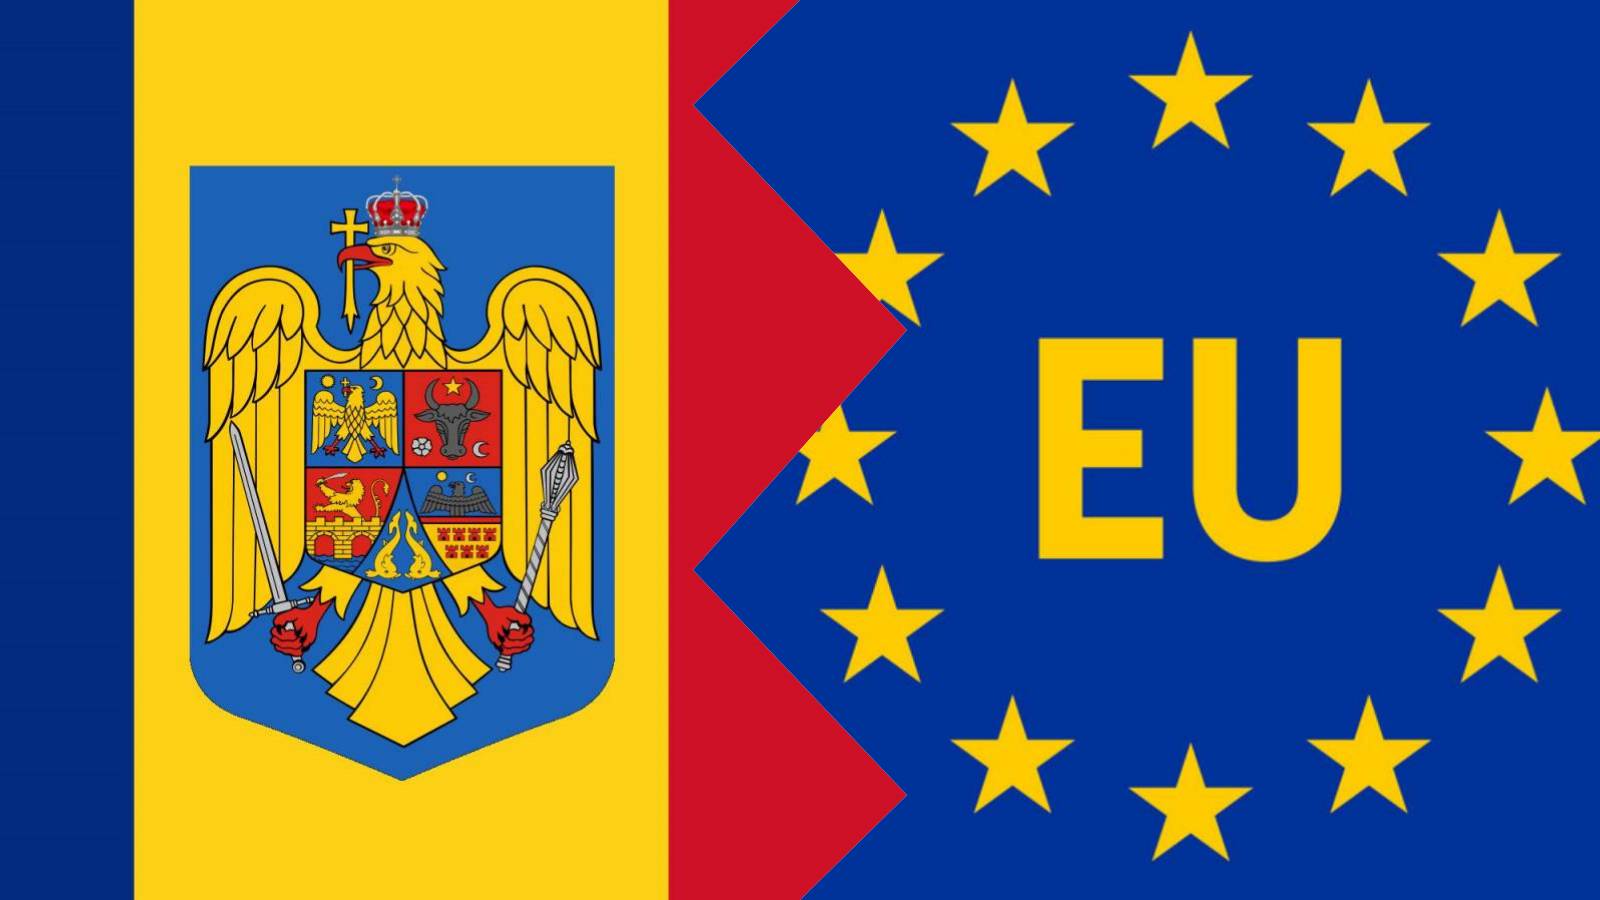 Romania Formal Declarations LAST MOMENT Brussels Completion of Schengen Accession